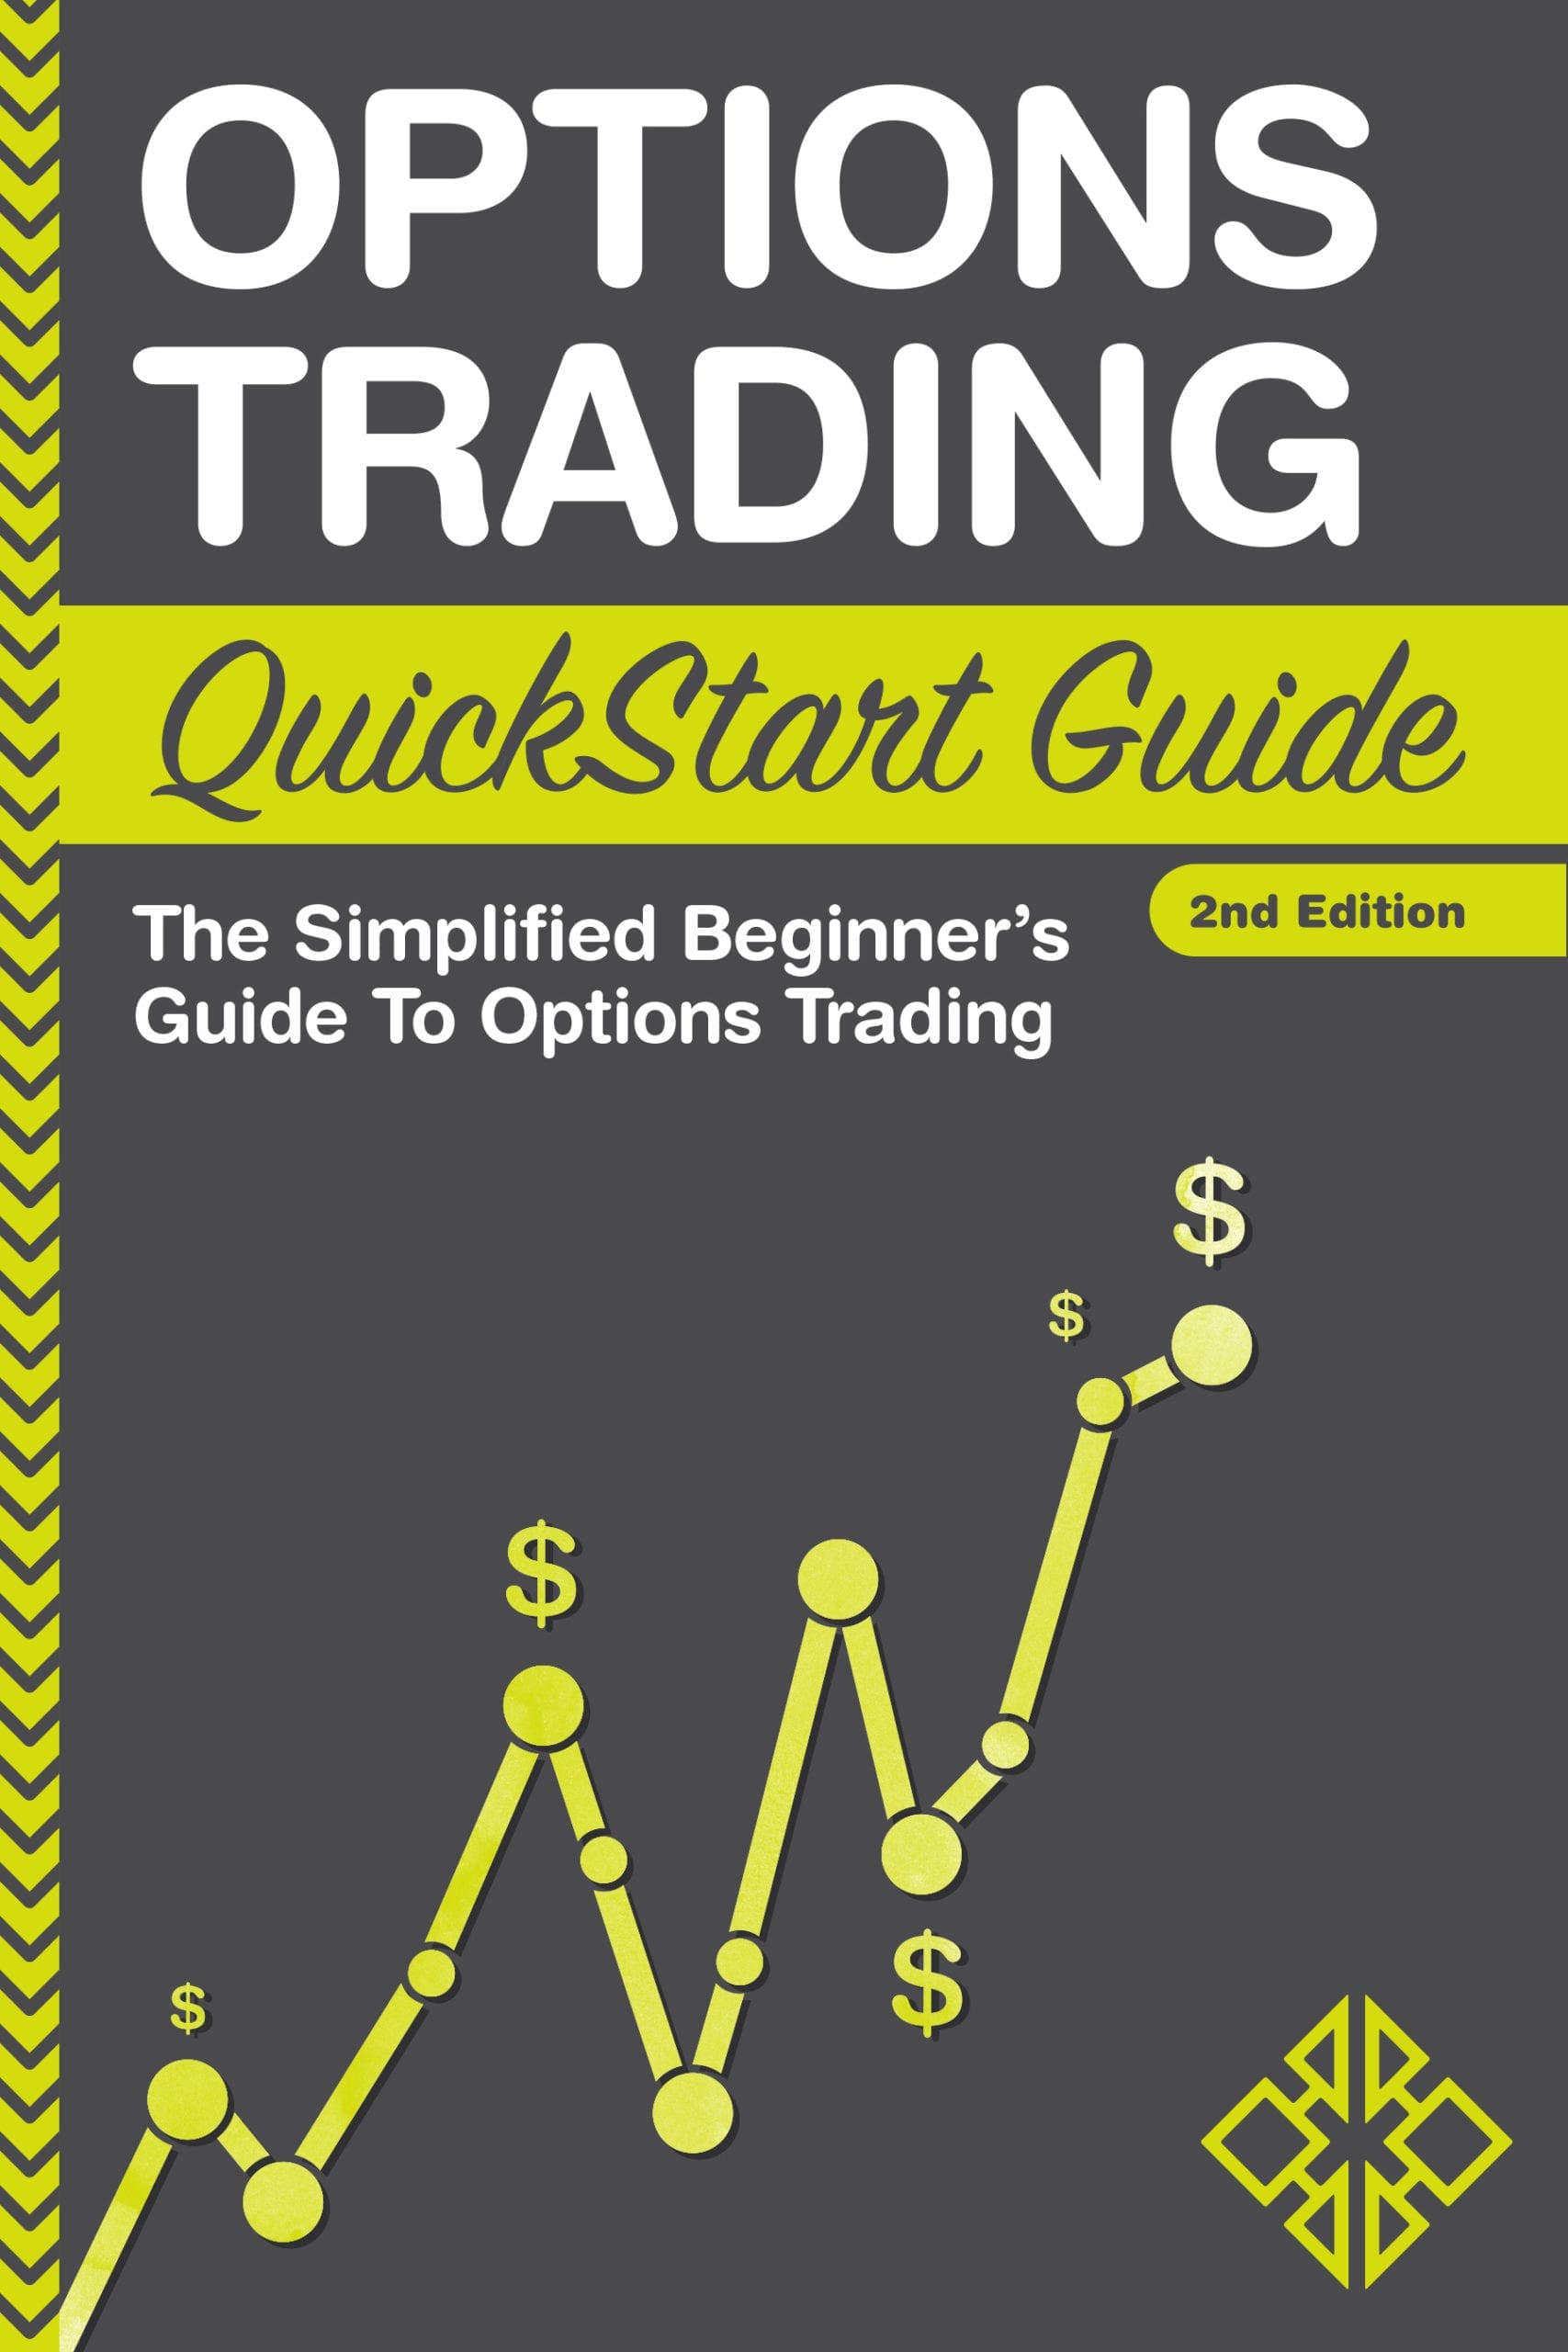 Options Trading QuickStart Guide published by ClydeBank Media